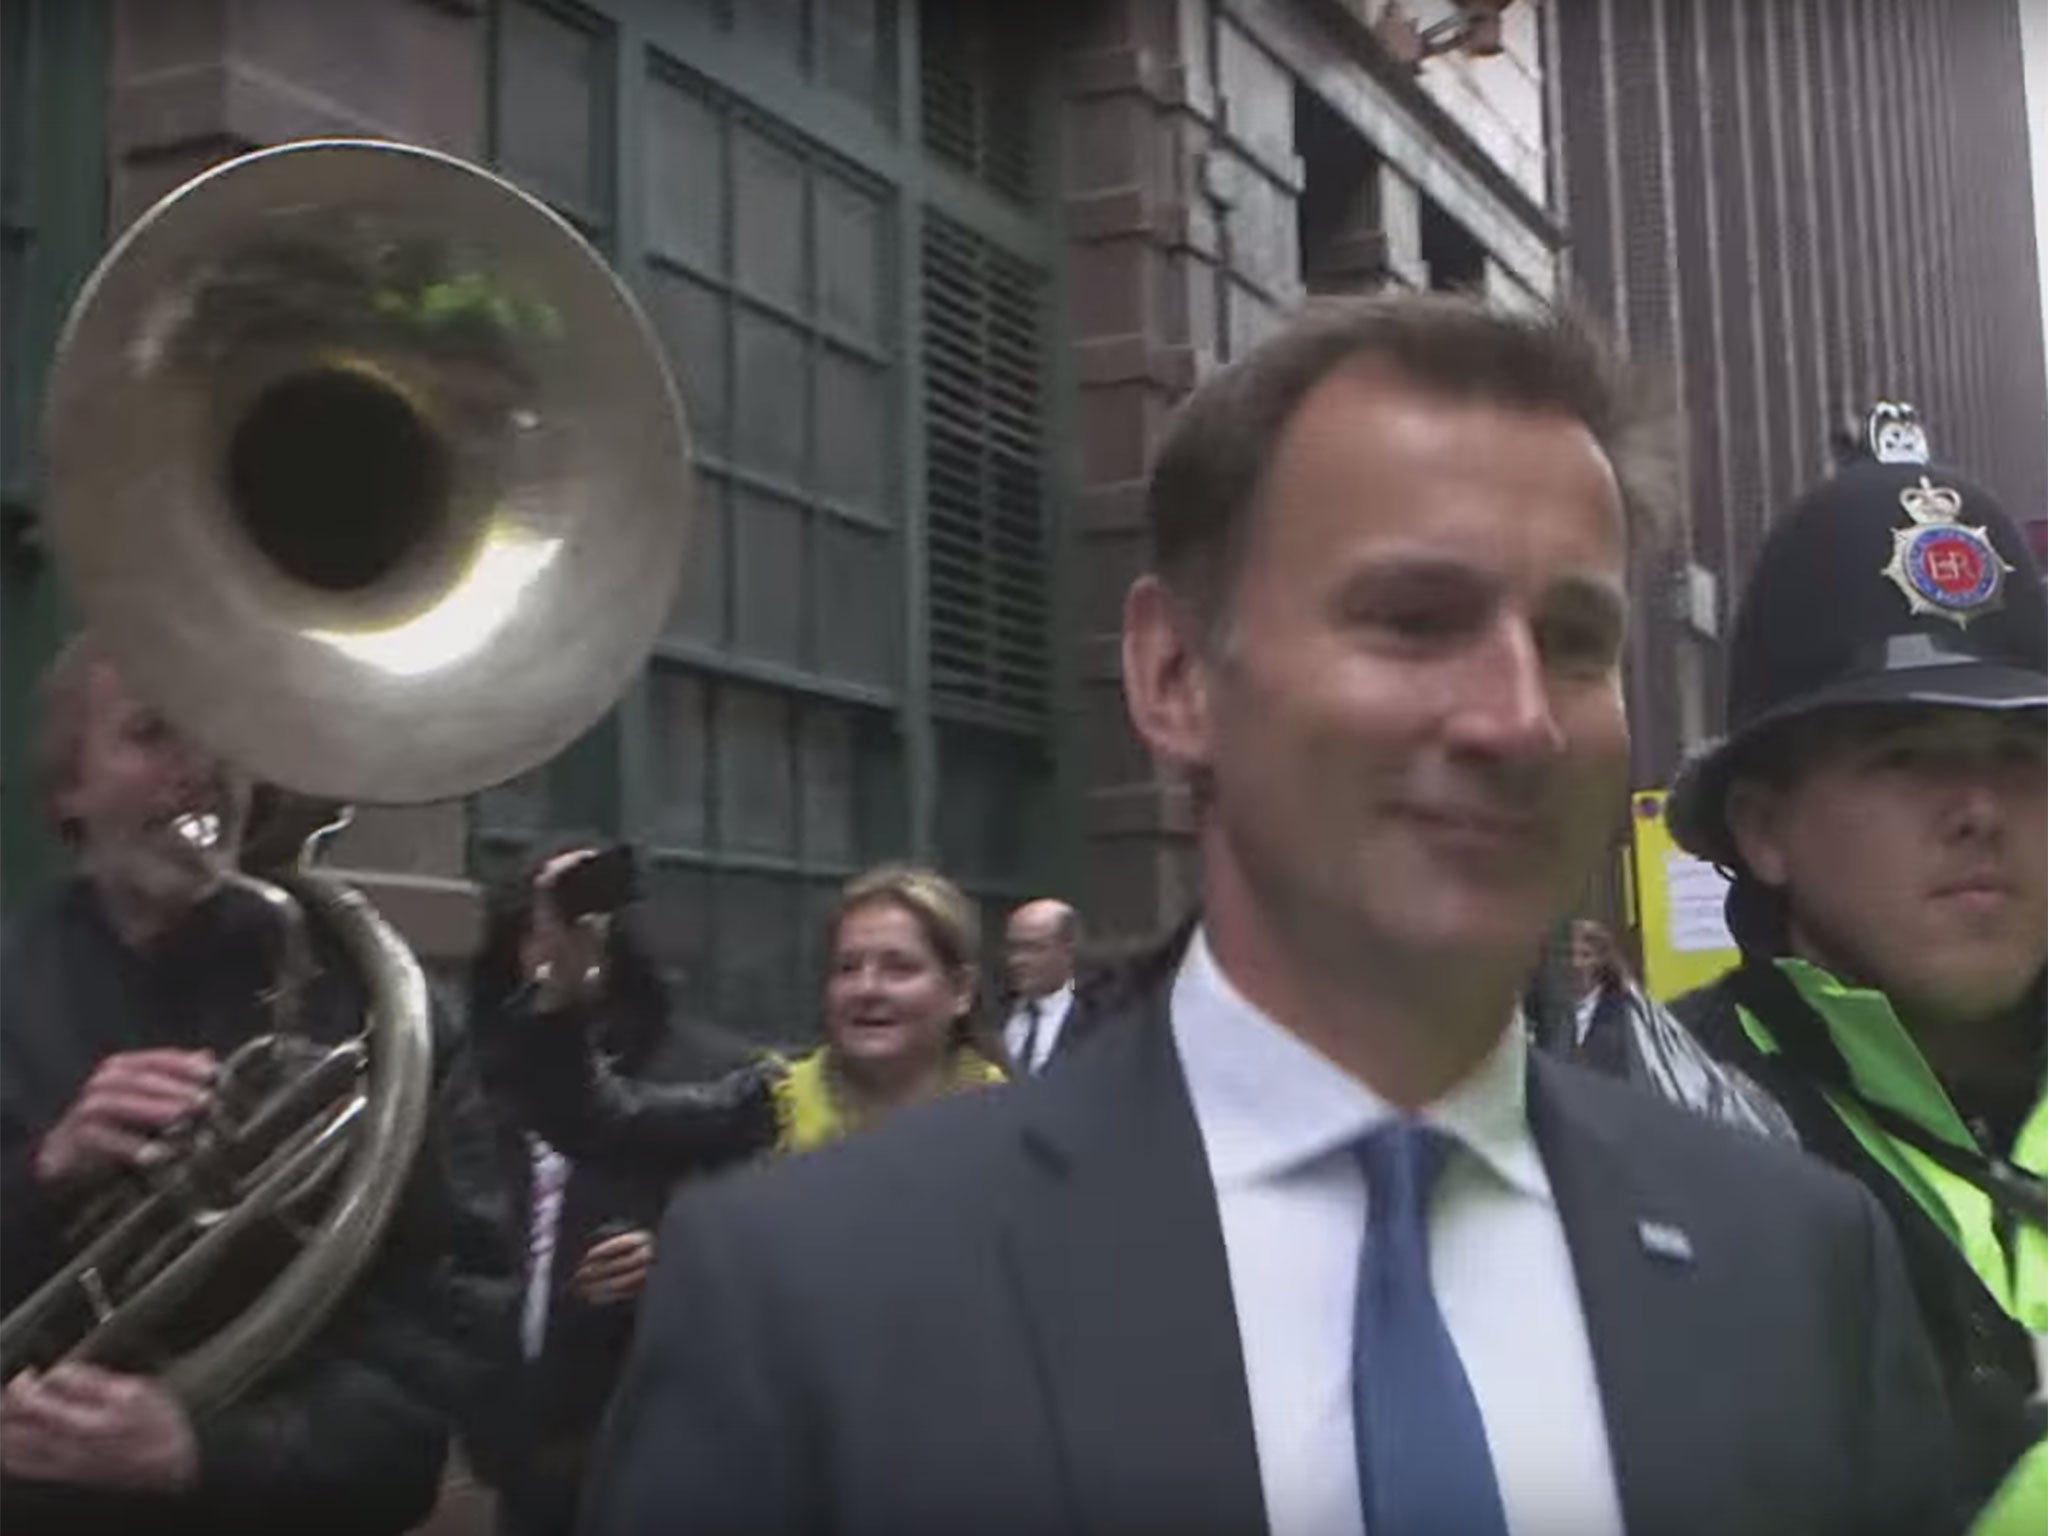 The Last Leg sent a sousaphone player to follow Jeremy Hunt around at the Tory conference